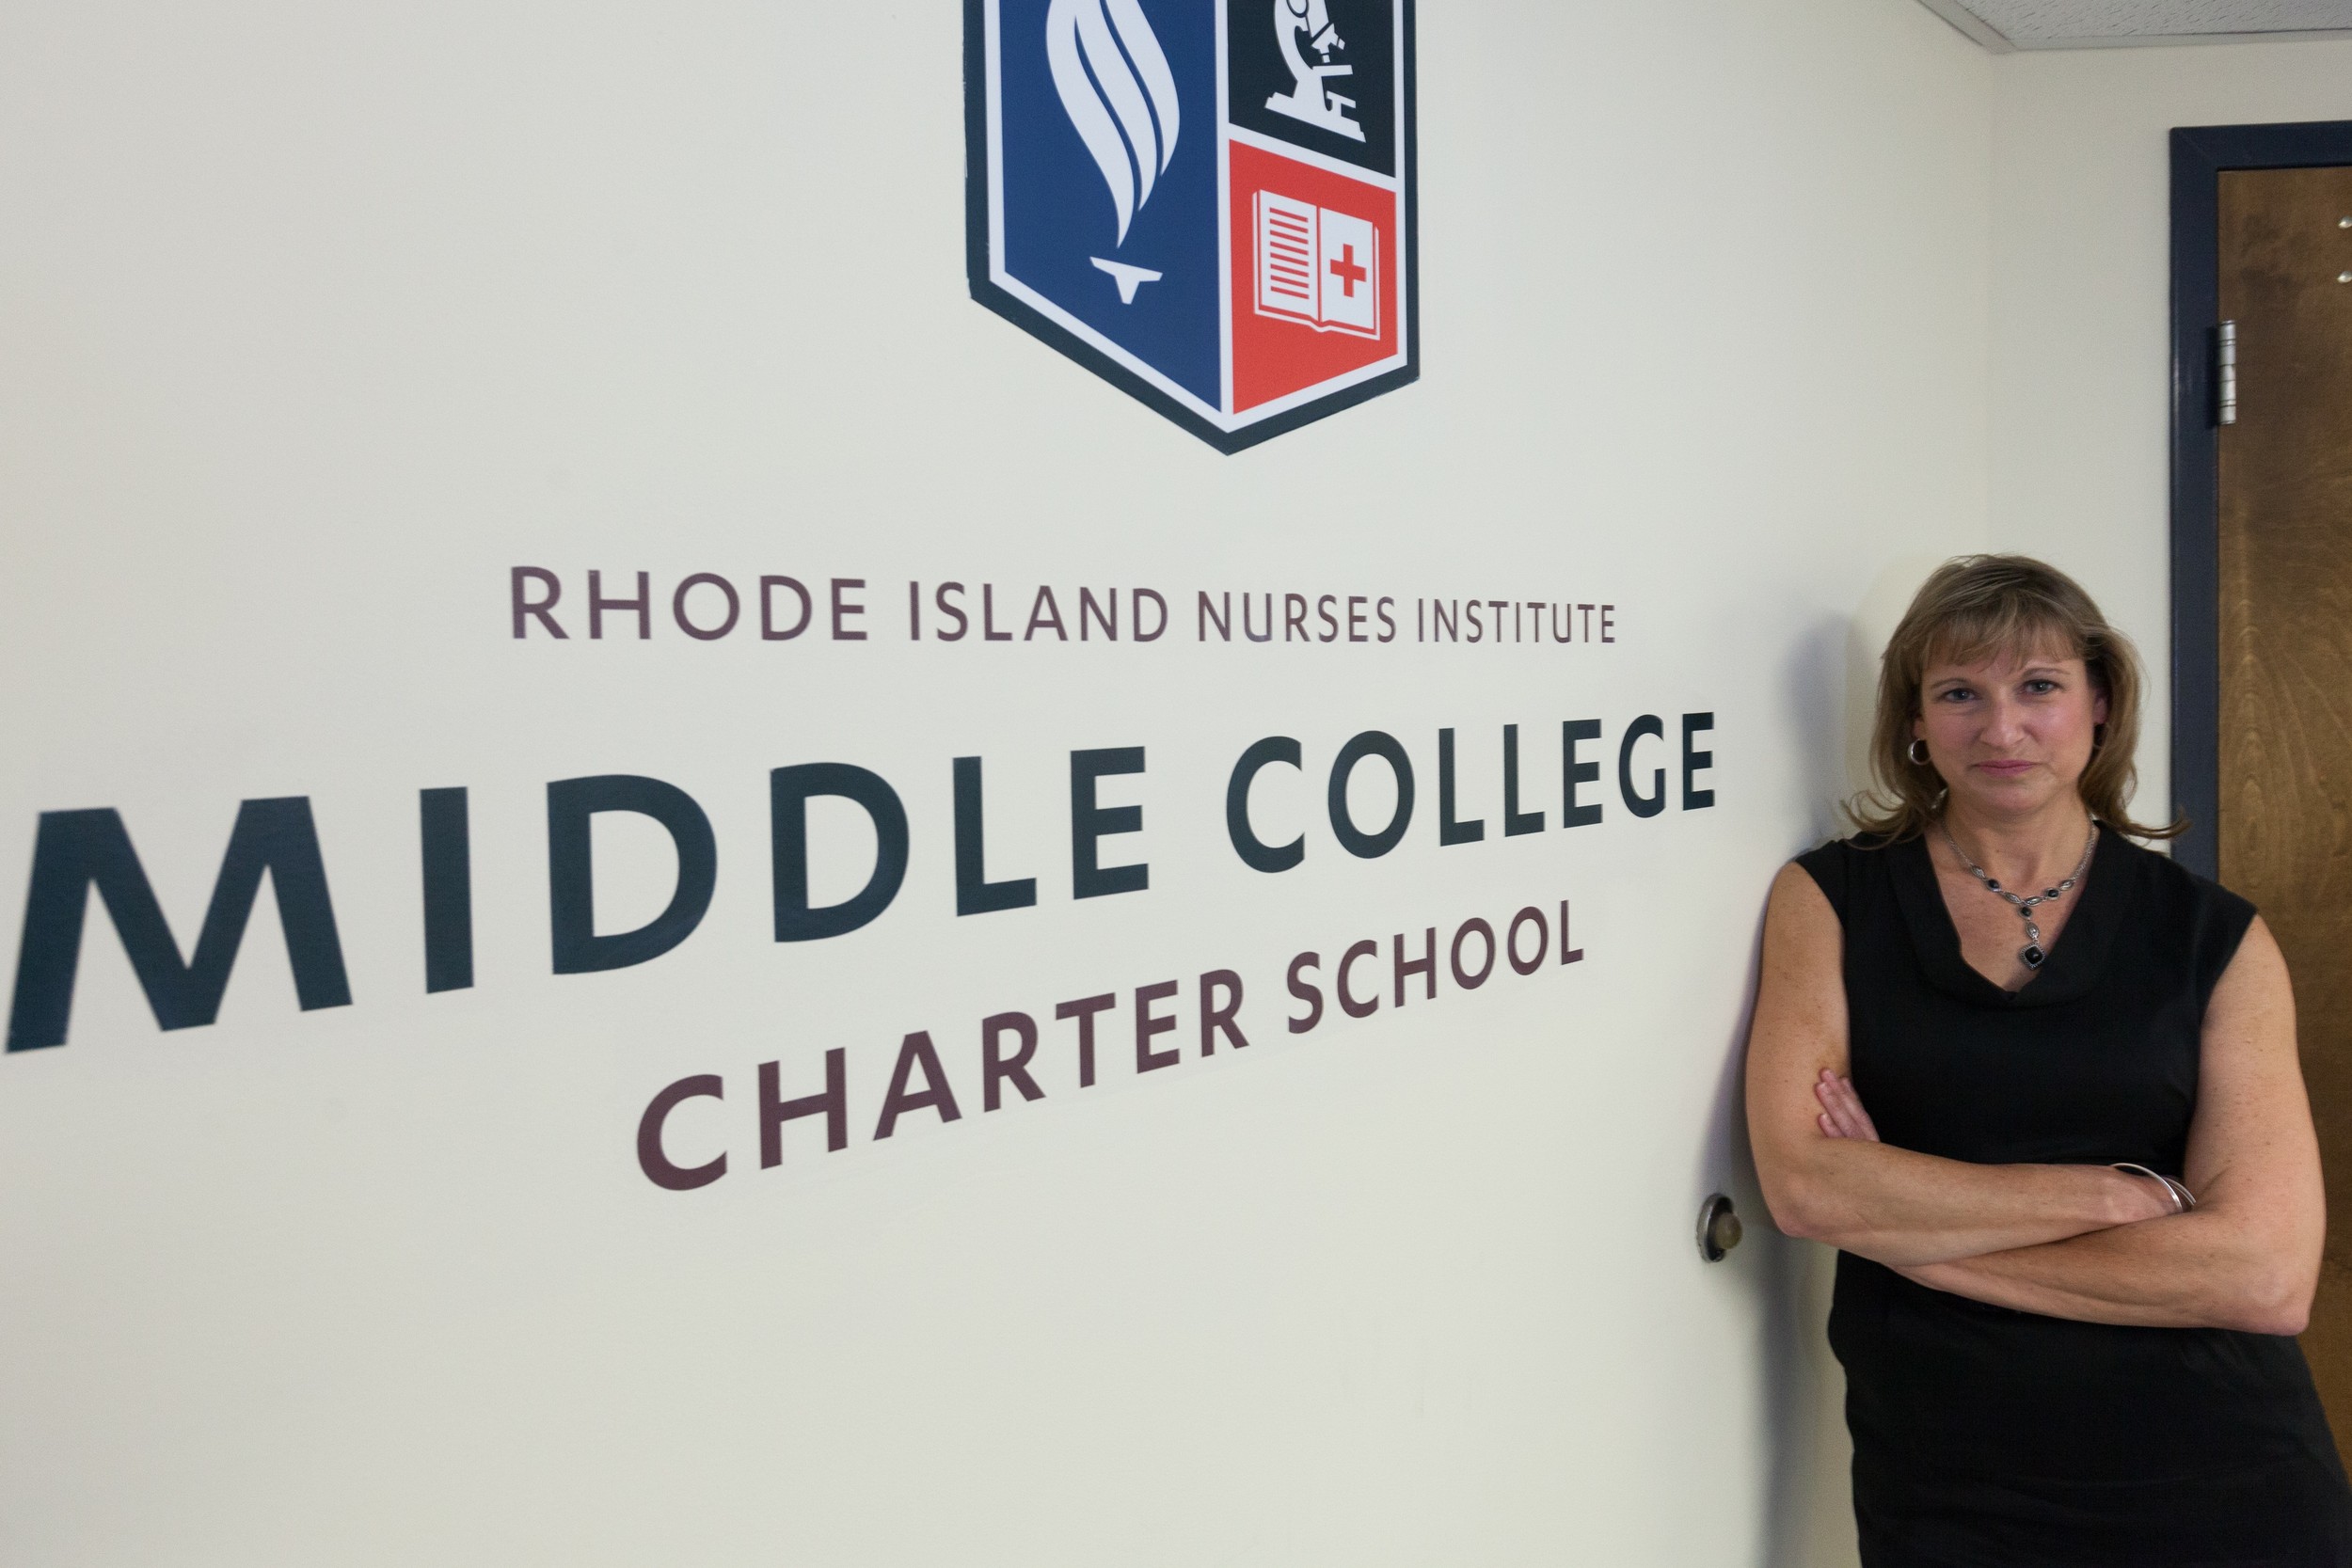 Pamela McCue, CEO of the R.I. Nurses Institute Middle College Charter School, leads an innovative public charter school with 272 students, with the goal of creating an educational pathway to a career in nursing.